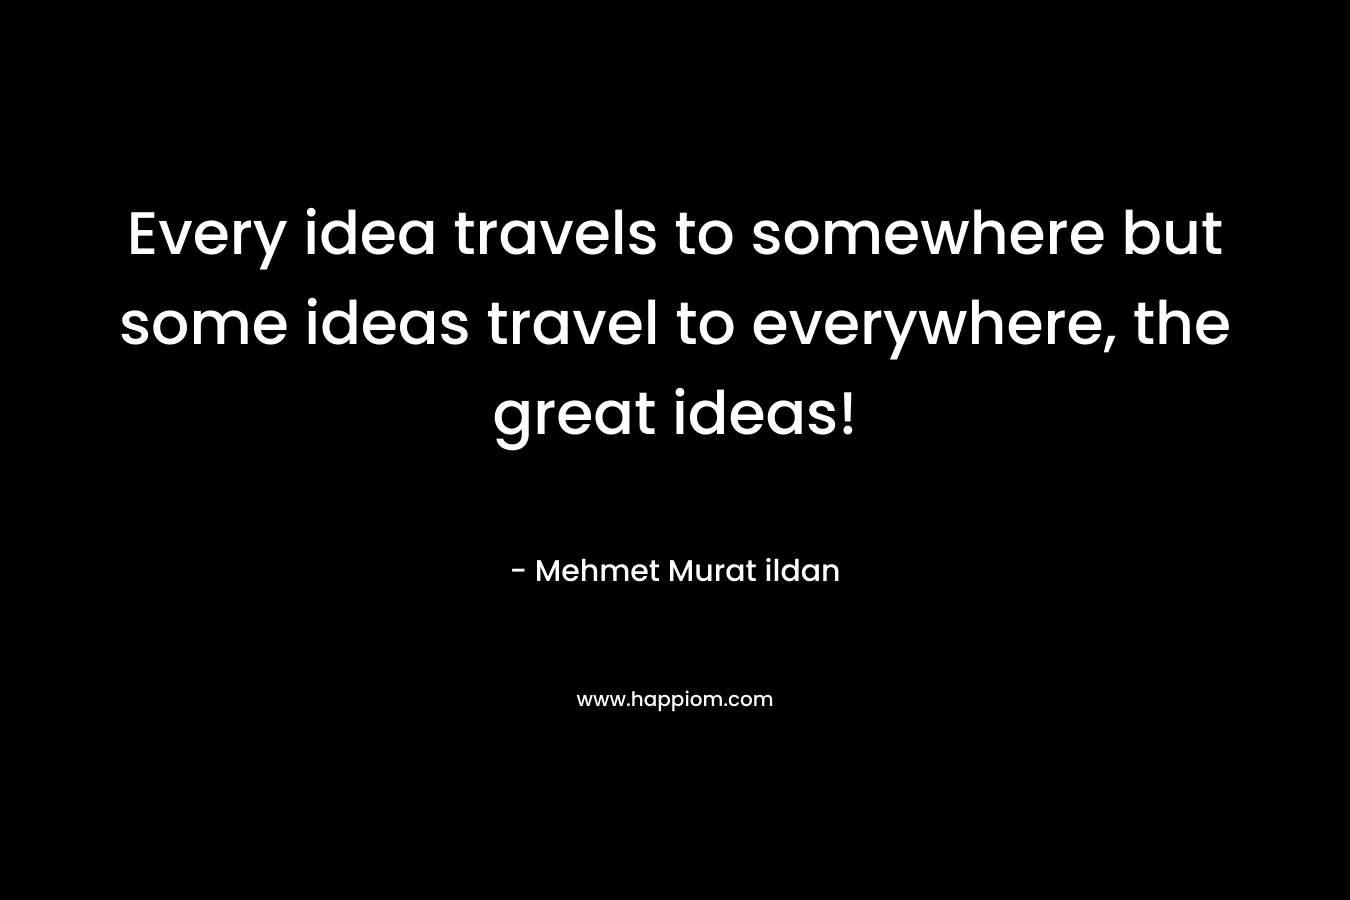 Every idea travels to somewhere but some ideas travel to everywhere, the great ideas! – Mehmet Murat ildan